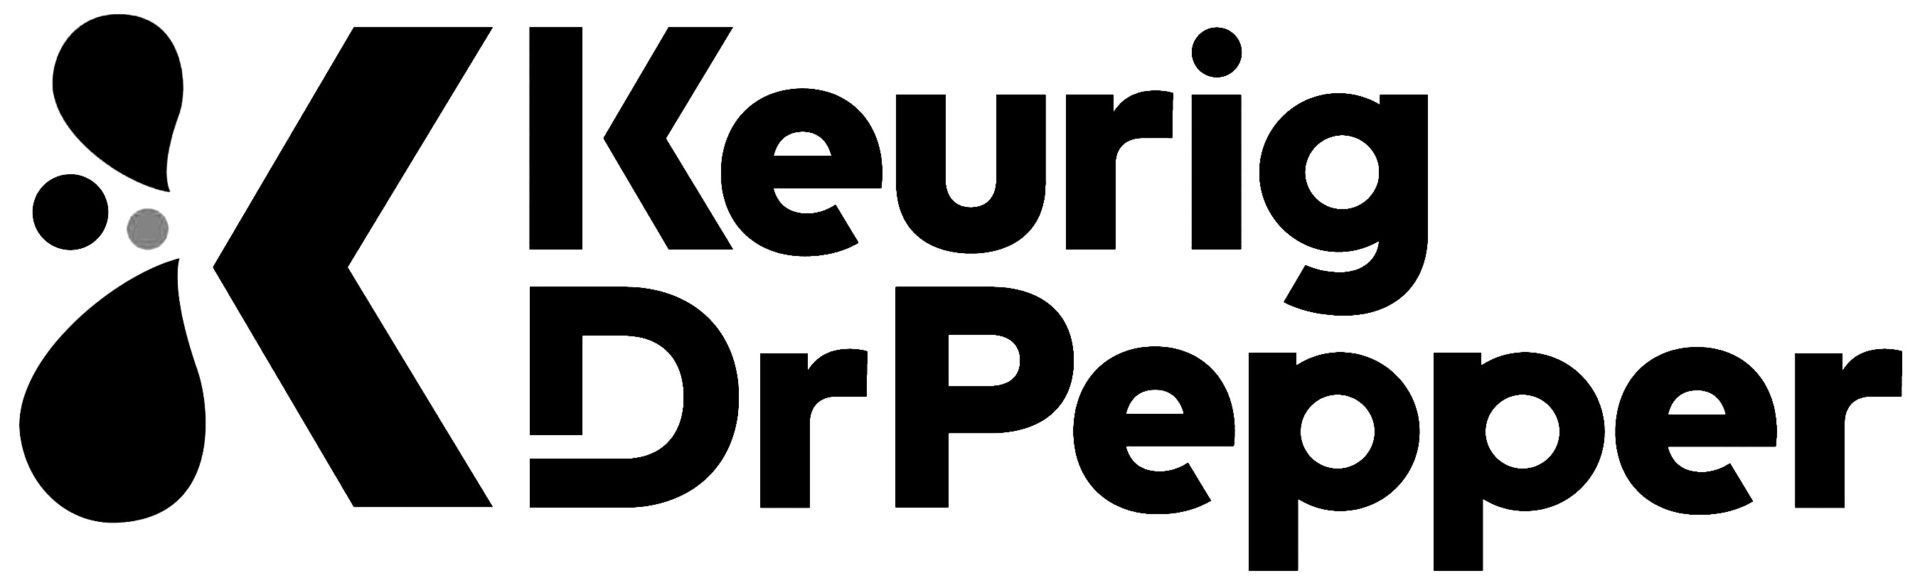 Black and grey Keurig Dr Pepper logo with text